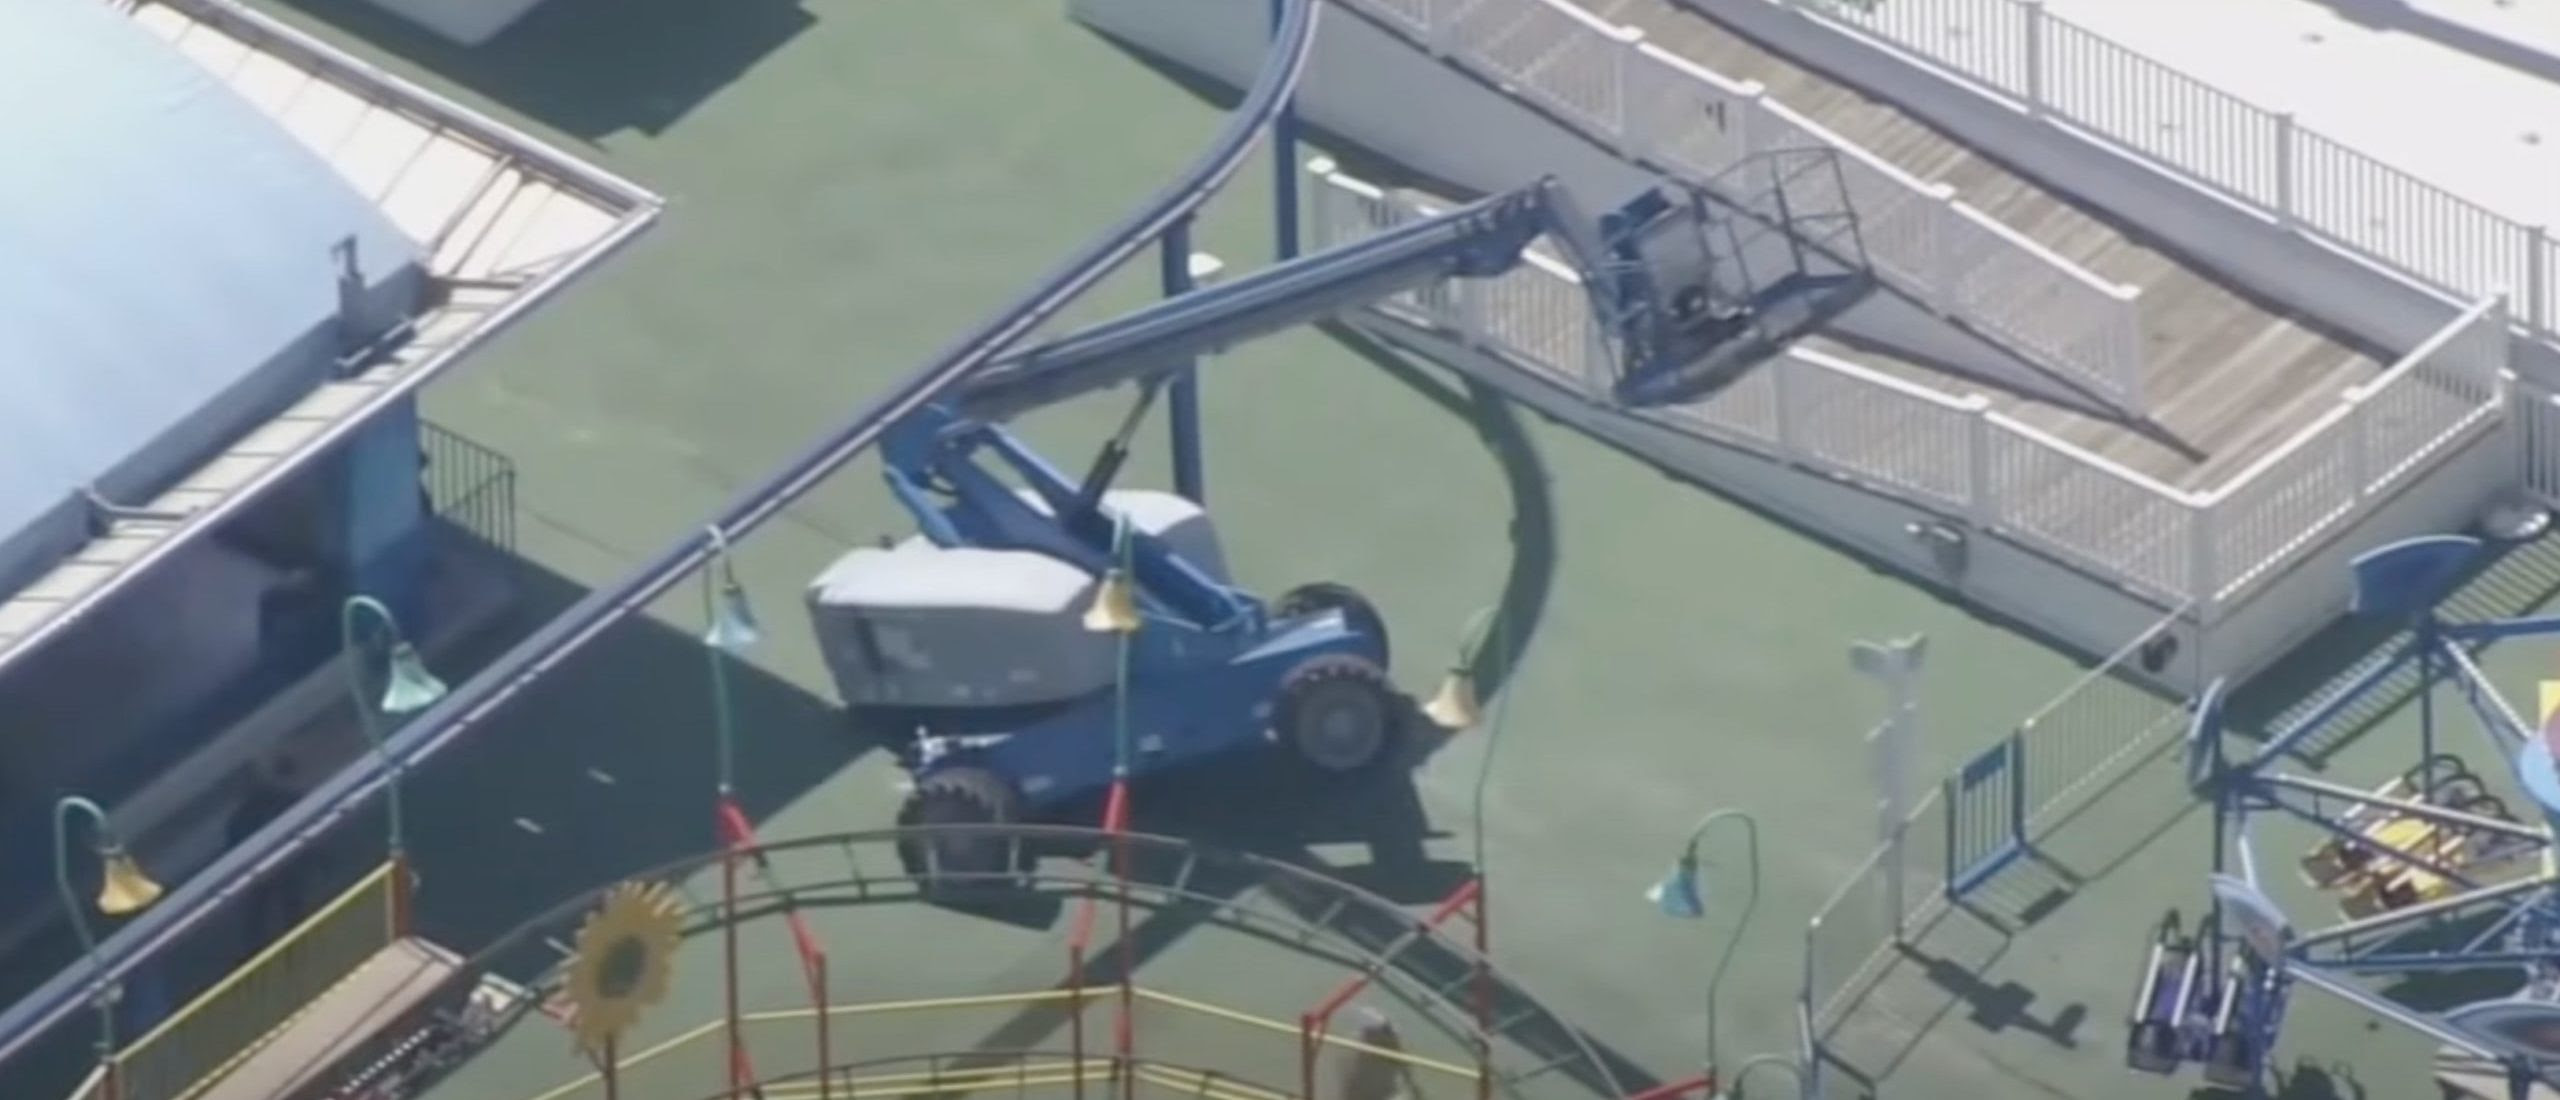 Subcontractor Falls To His Death While Fixing Jersey Shore Amusement Park Ride